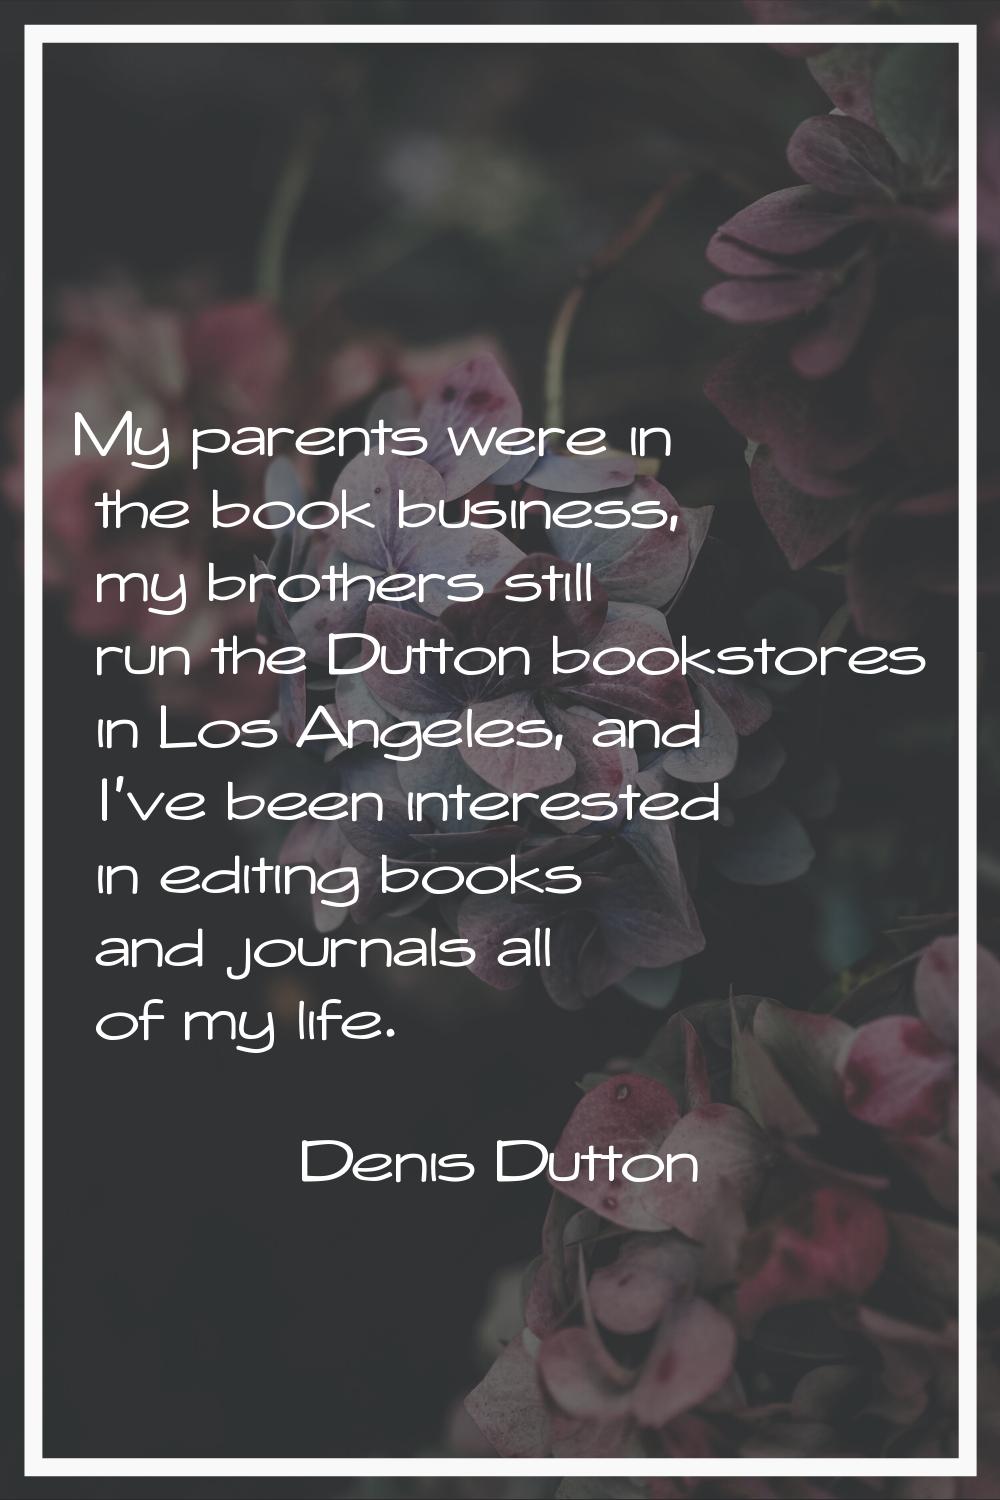 My parents were in the book business, my brothers still run the Dutton bookstores in Los Angeles, a